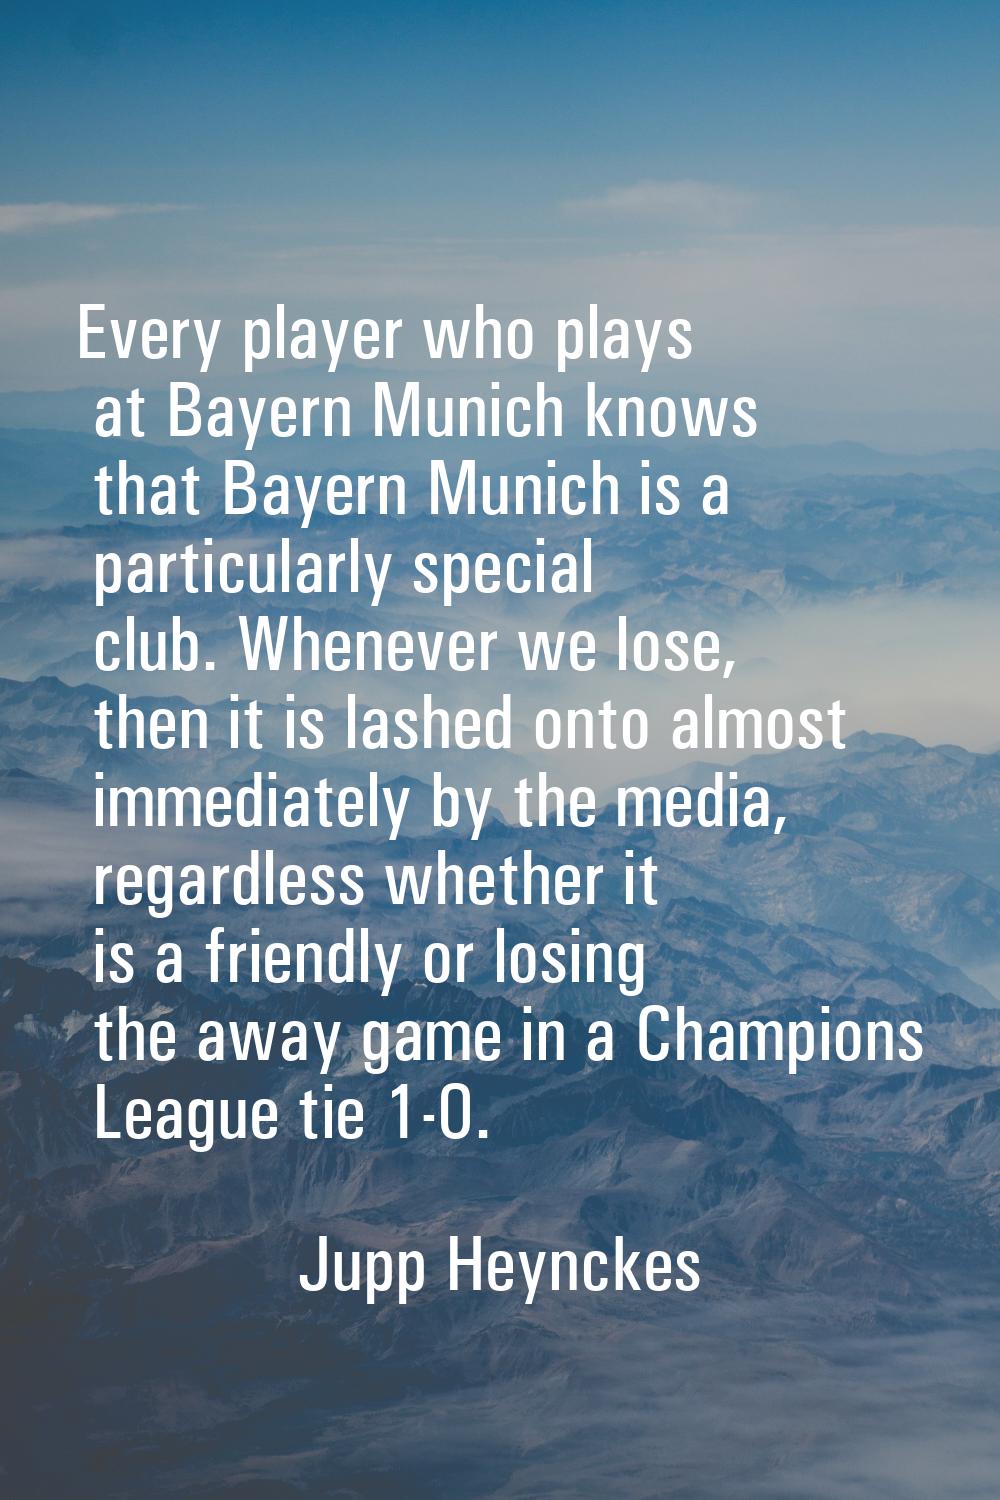 Every player who plays at Bayern Munich knows that Bayern Munich is a particularly special club. Wh